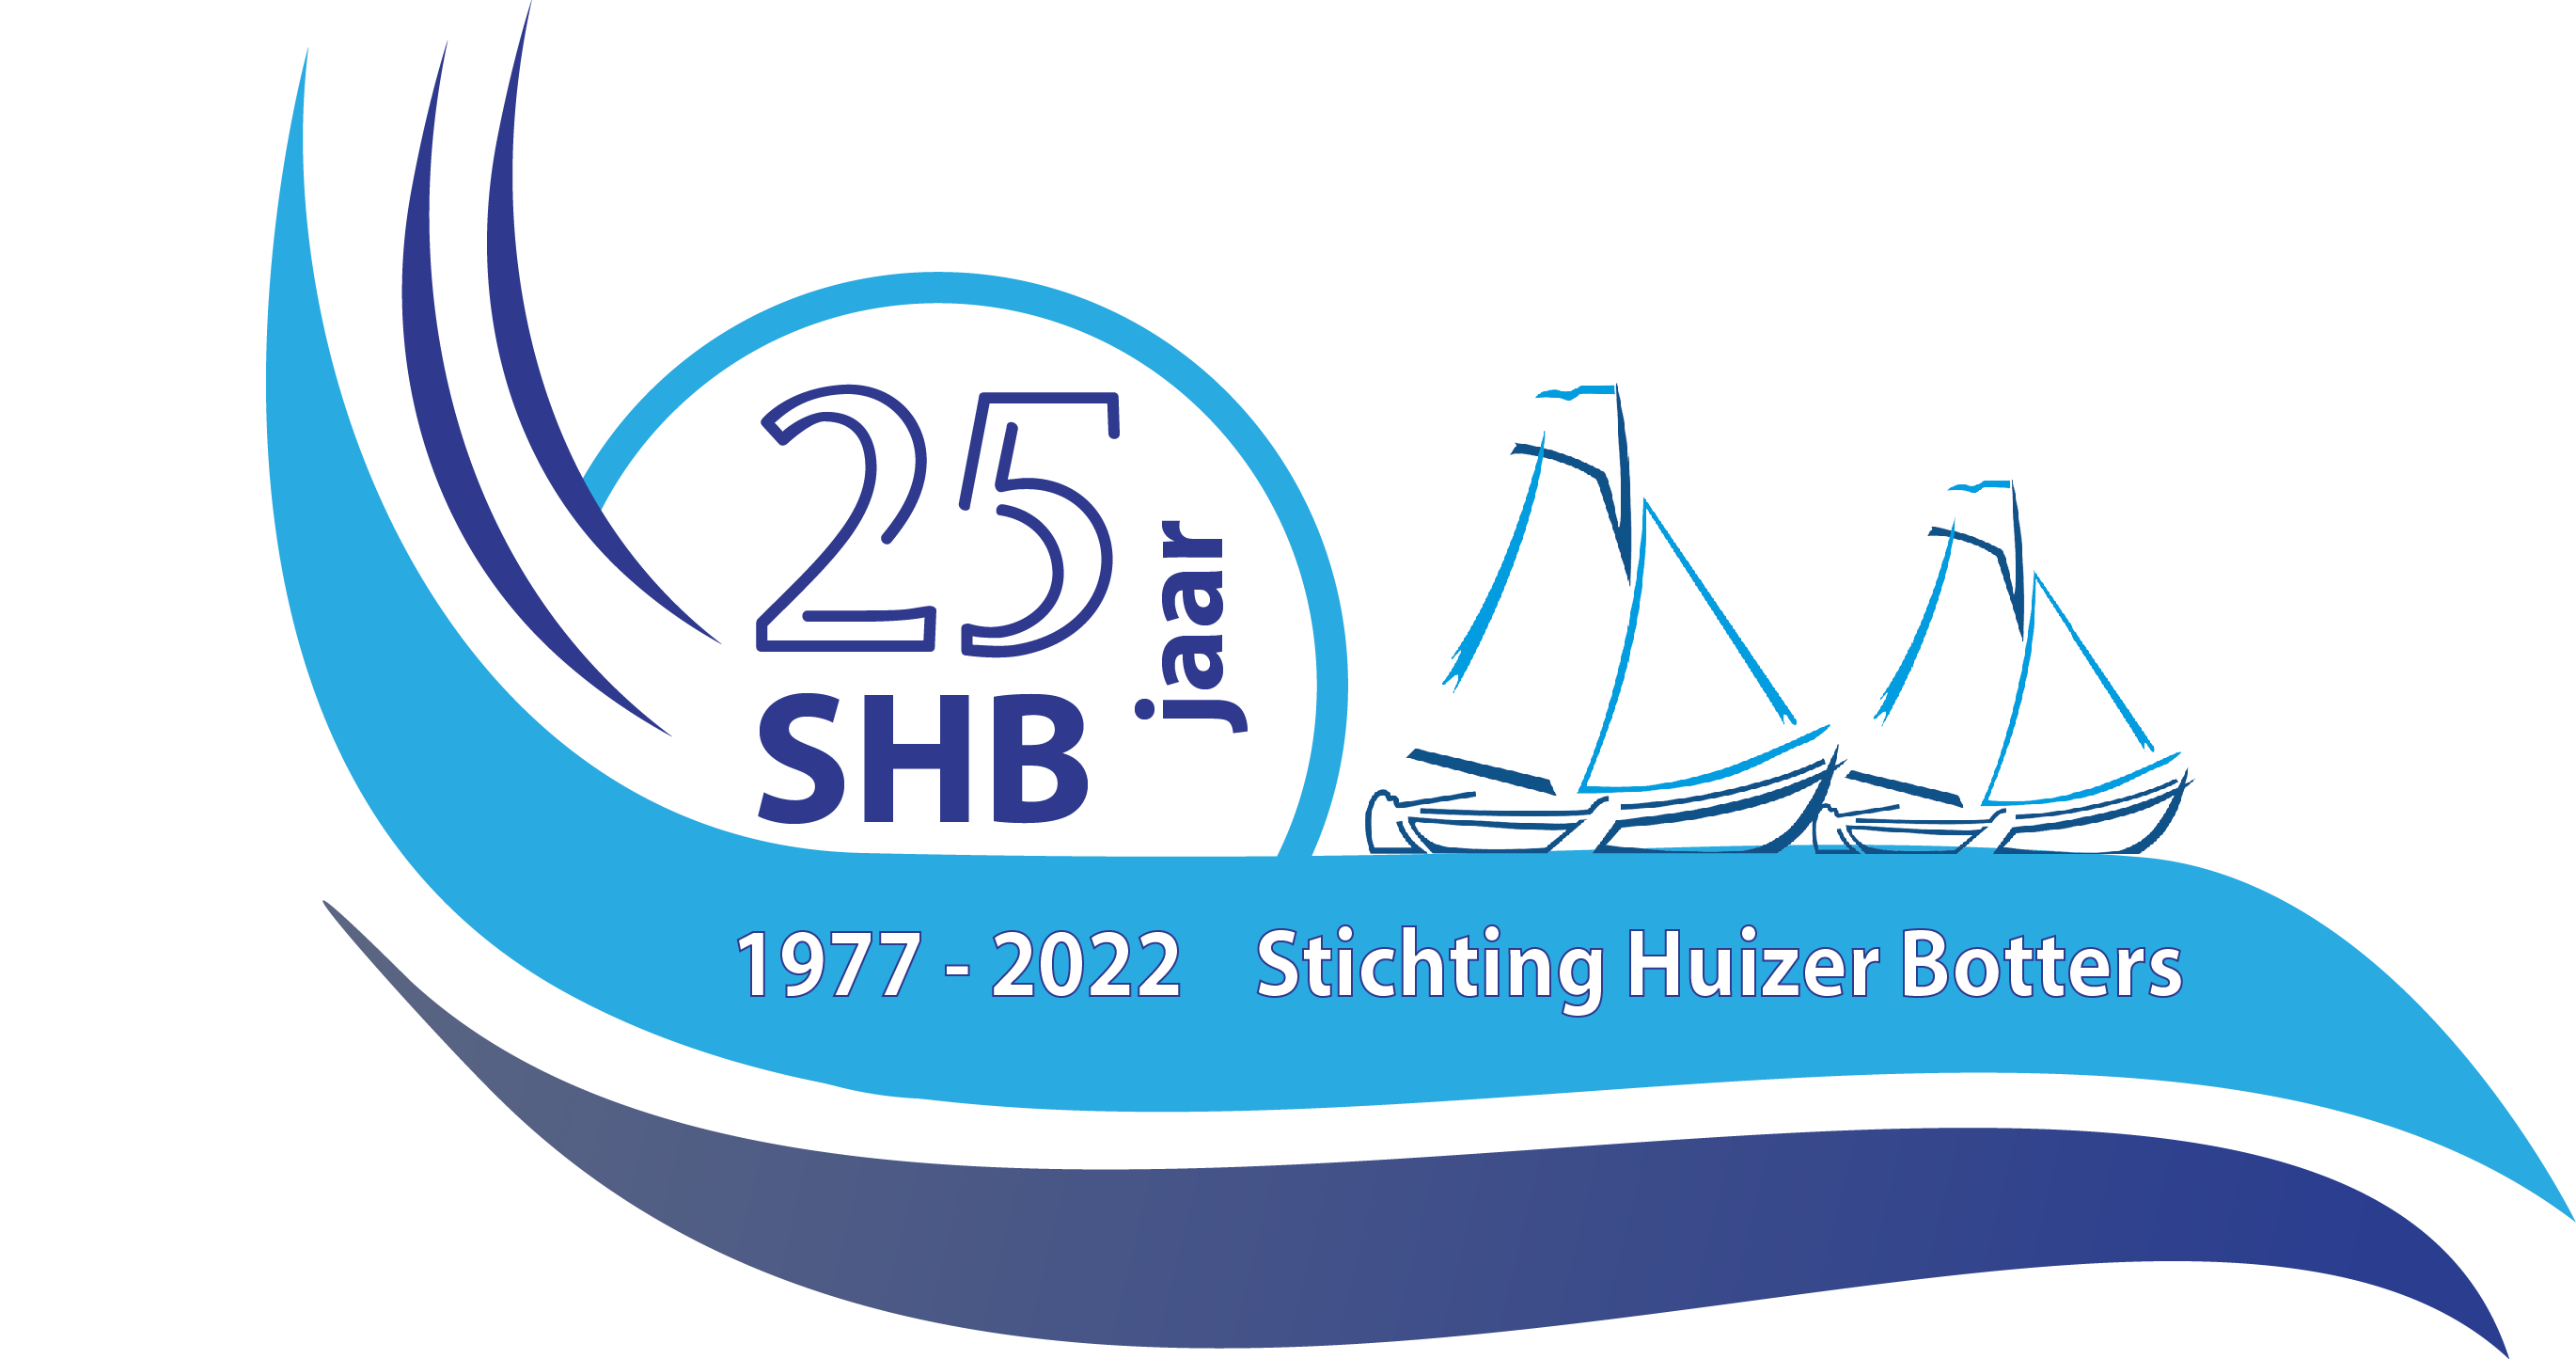 Stichting Huizer Botters